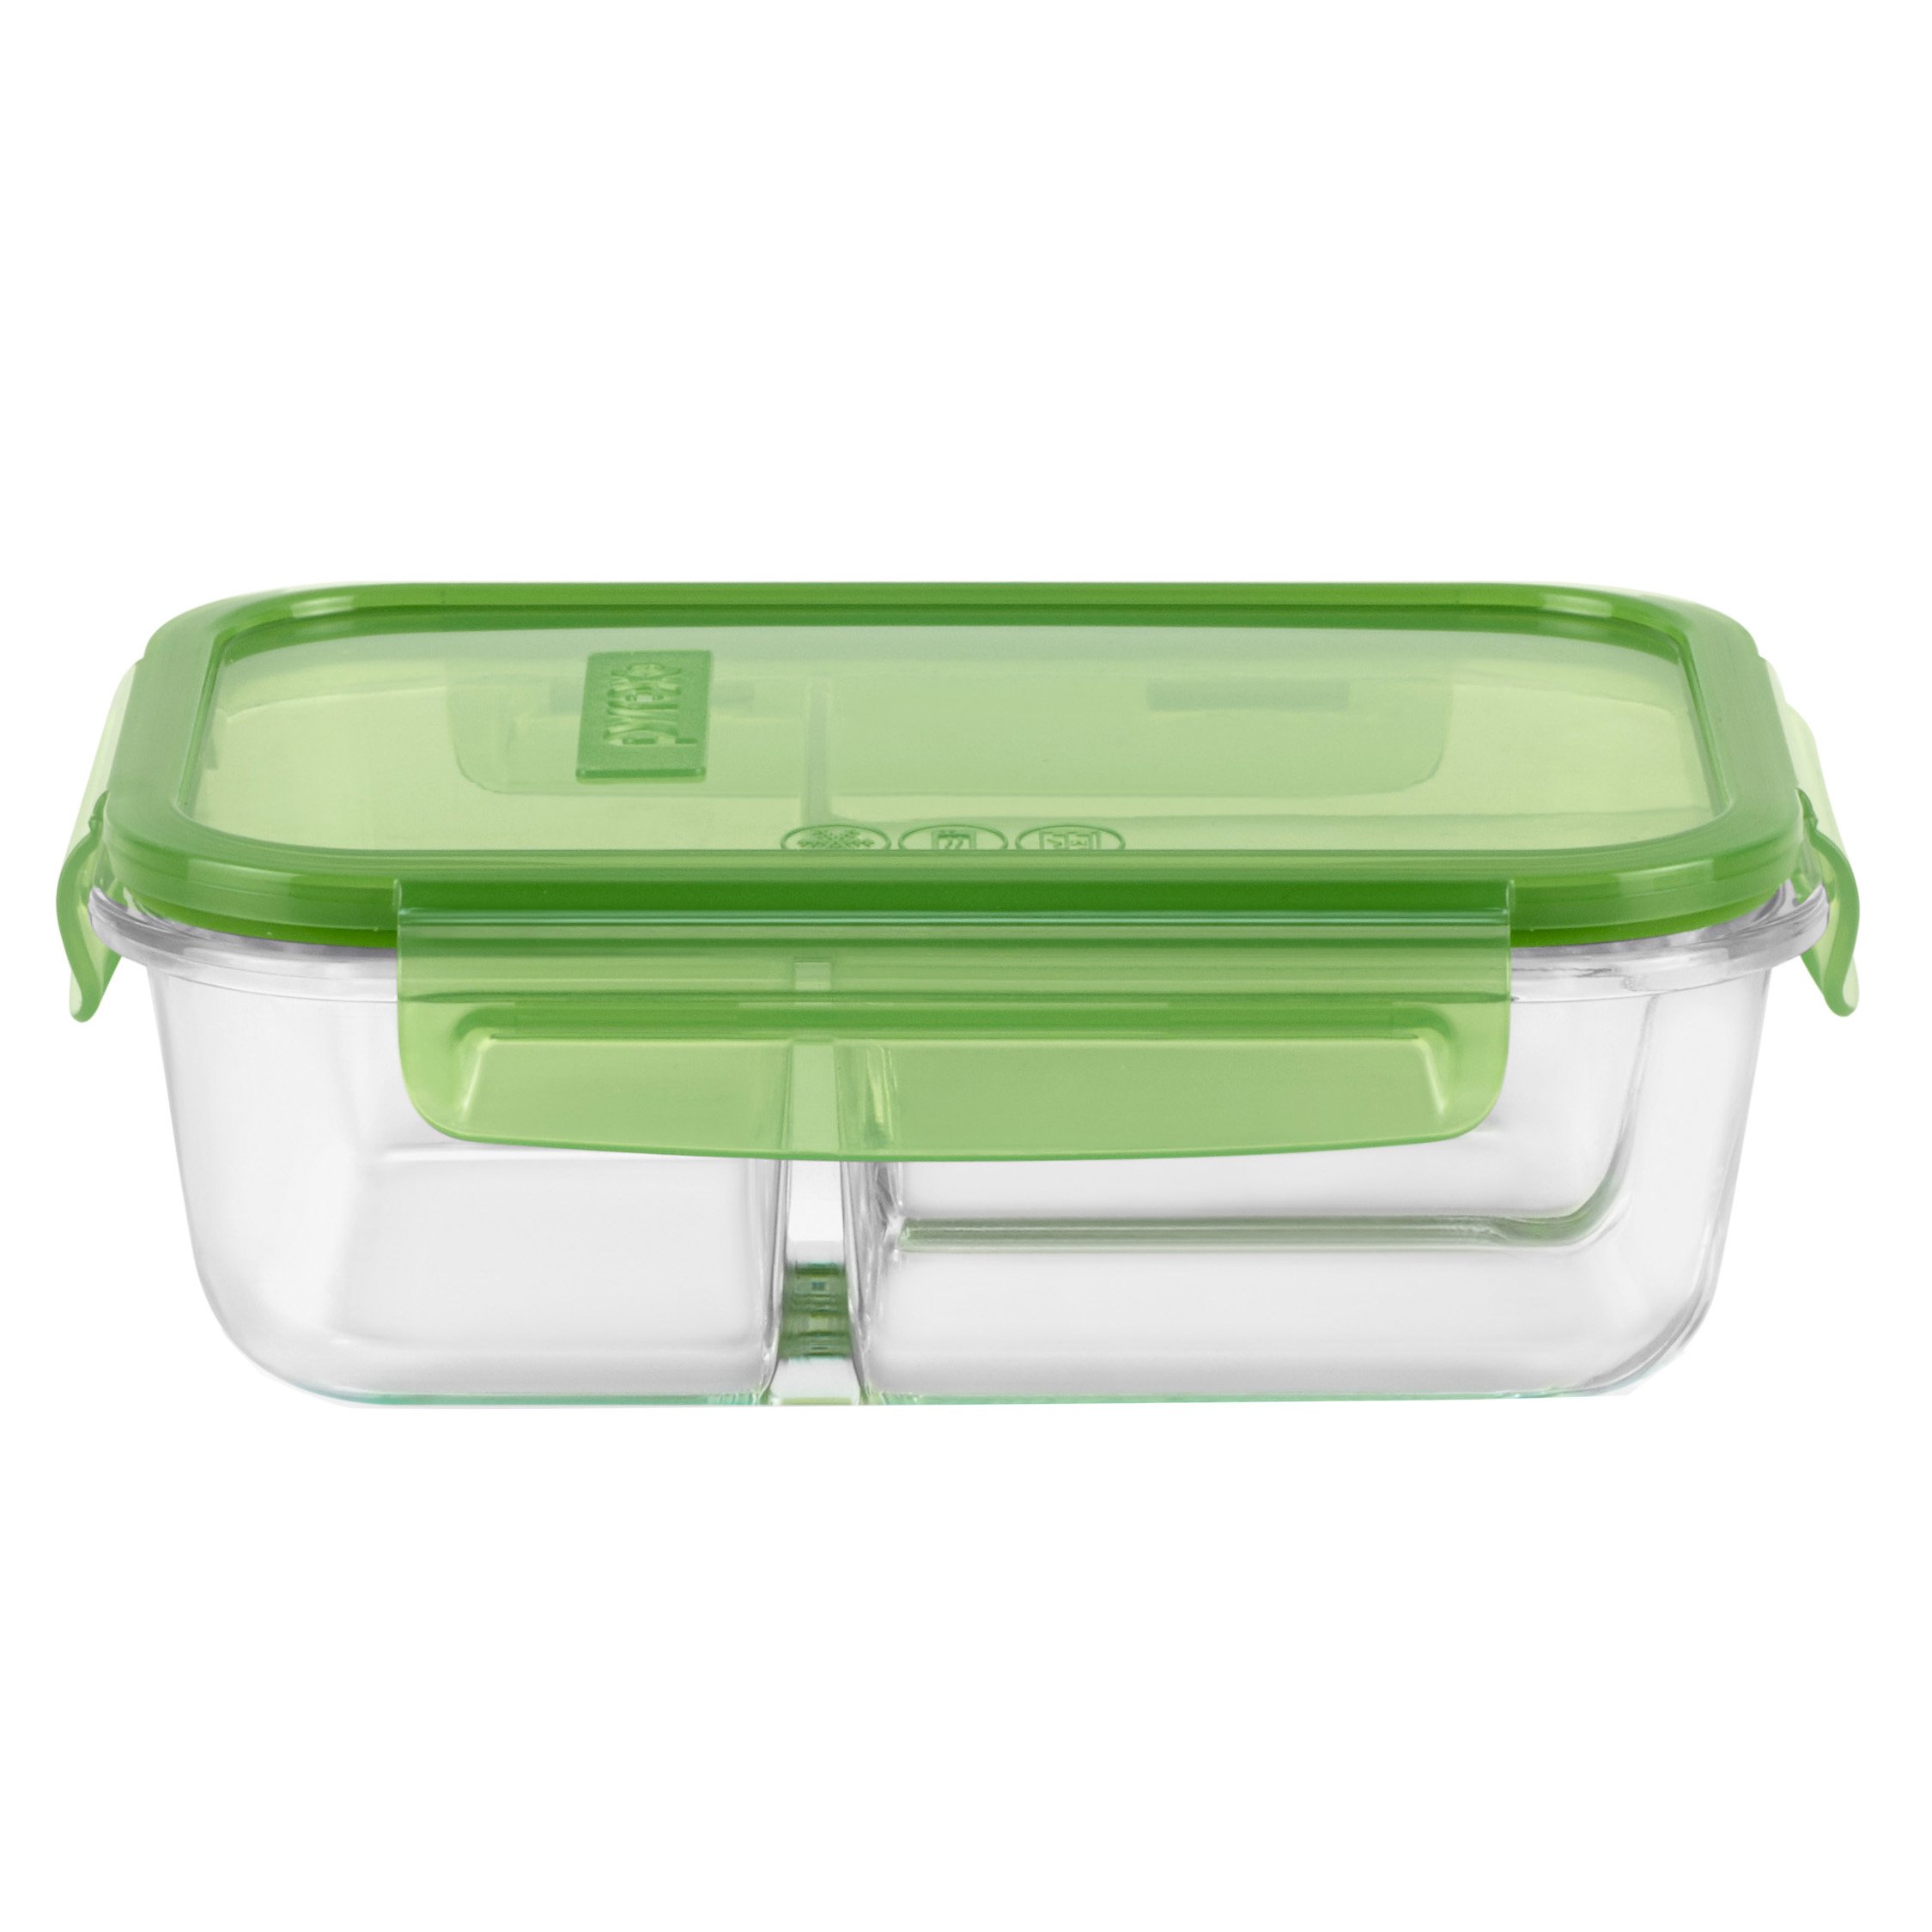 Pyrex MealBox Storage 5.5 Cup Rectangle Storage Container with Plastic Cover  - Farr's Hardware